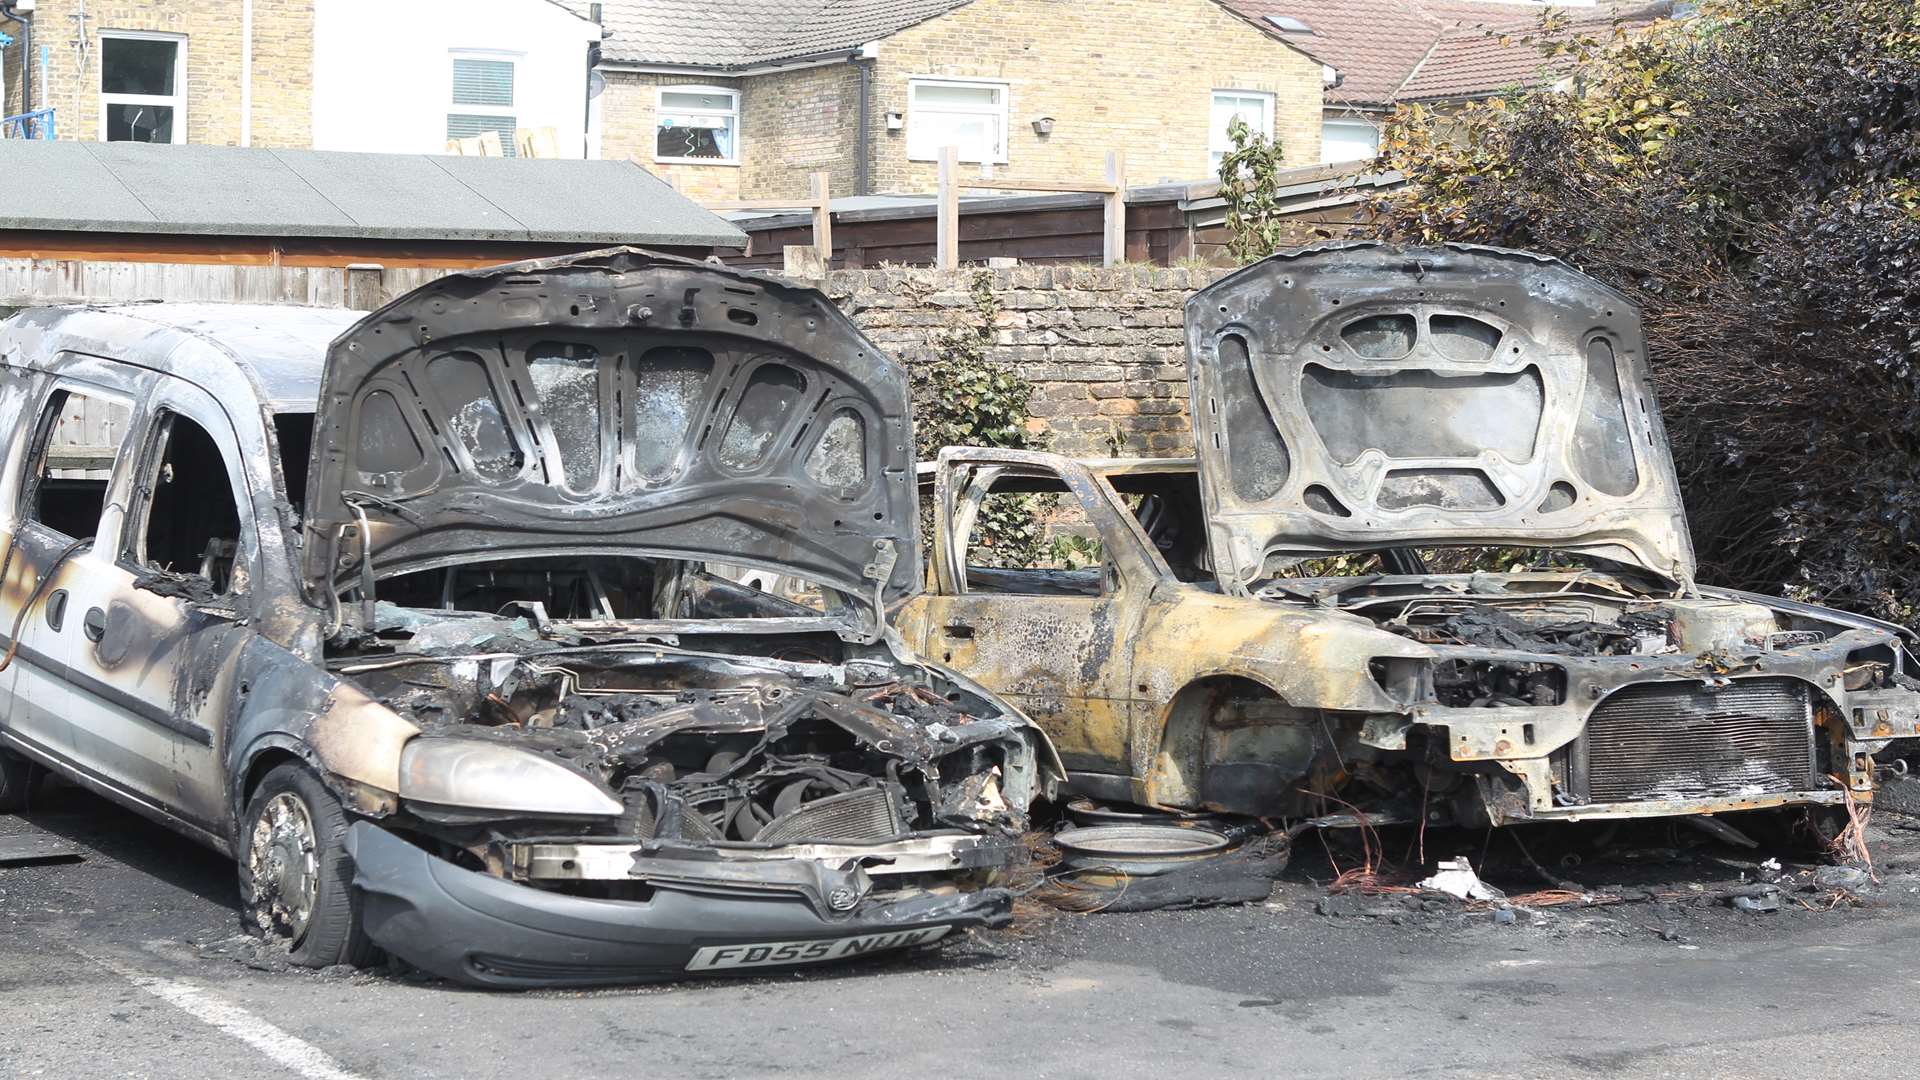 The cars were set alight in the car park off Rocfort Road. Picture: John Westhrop